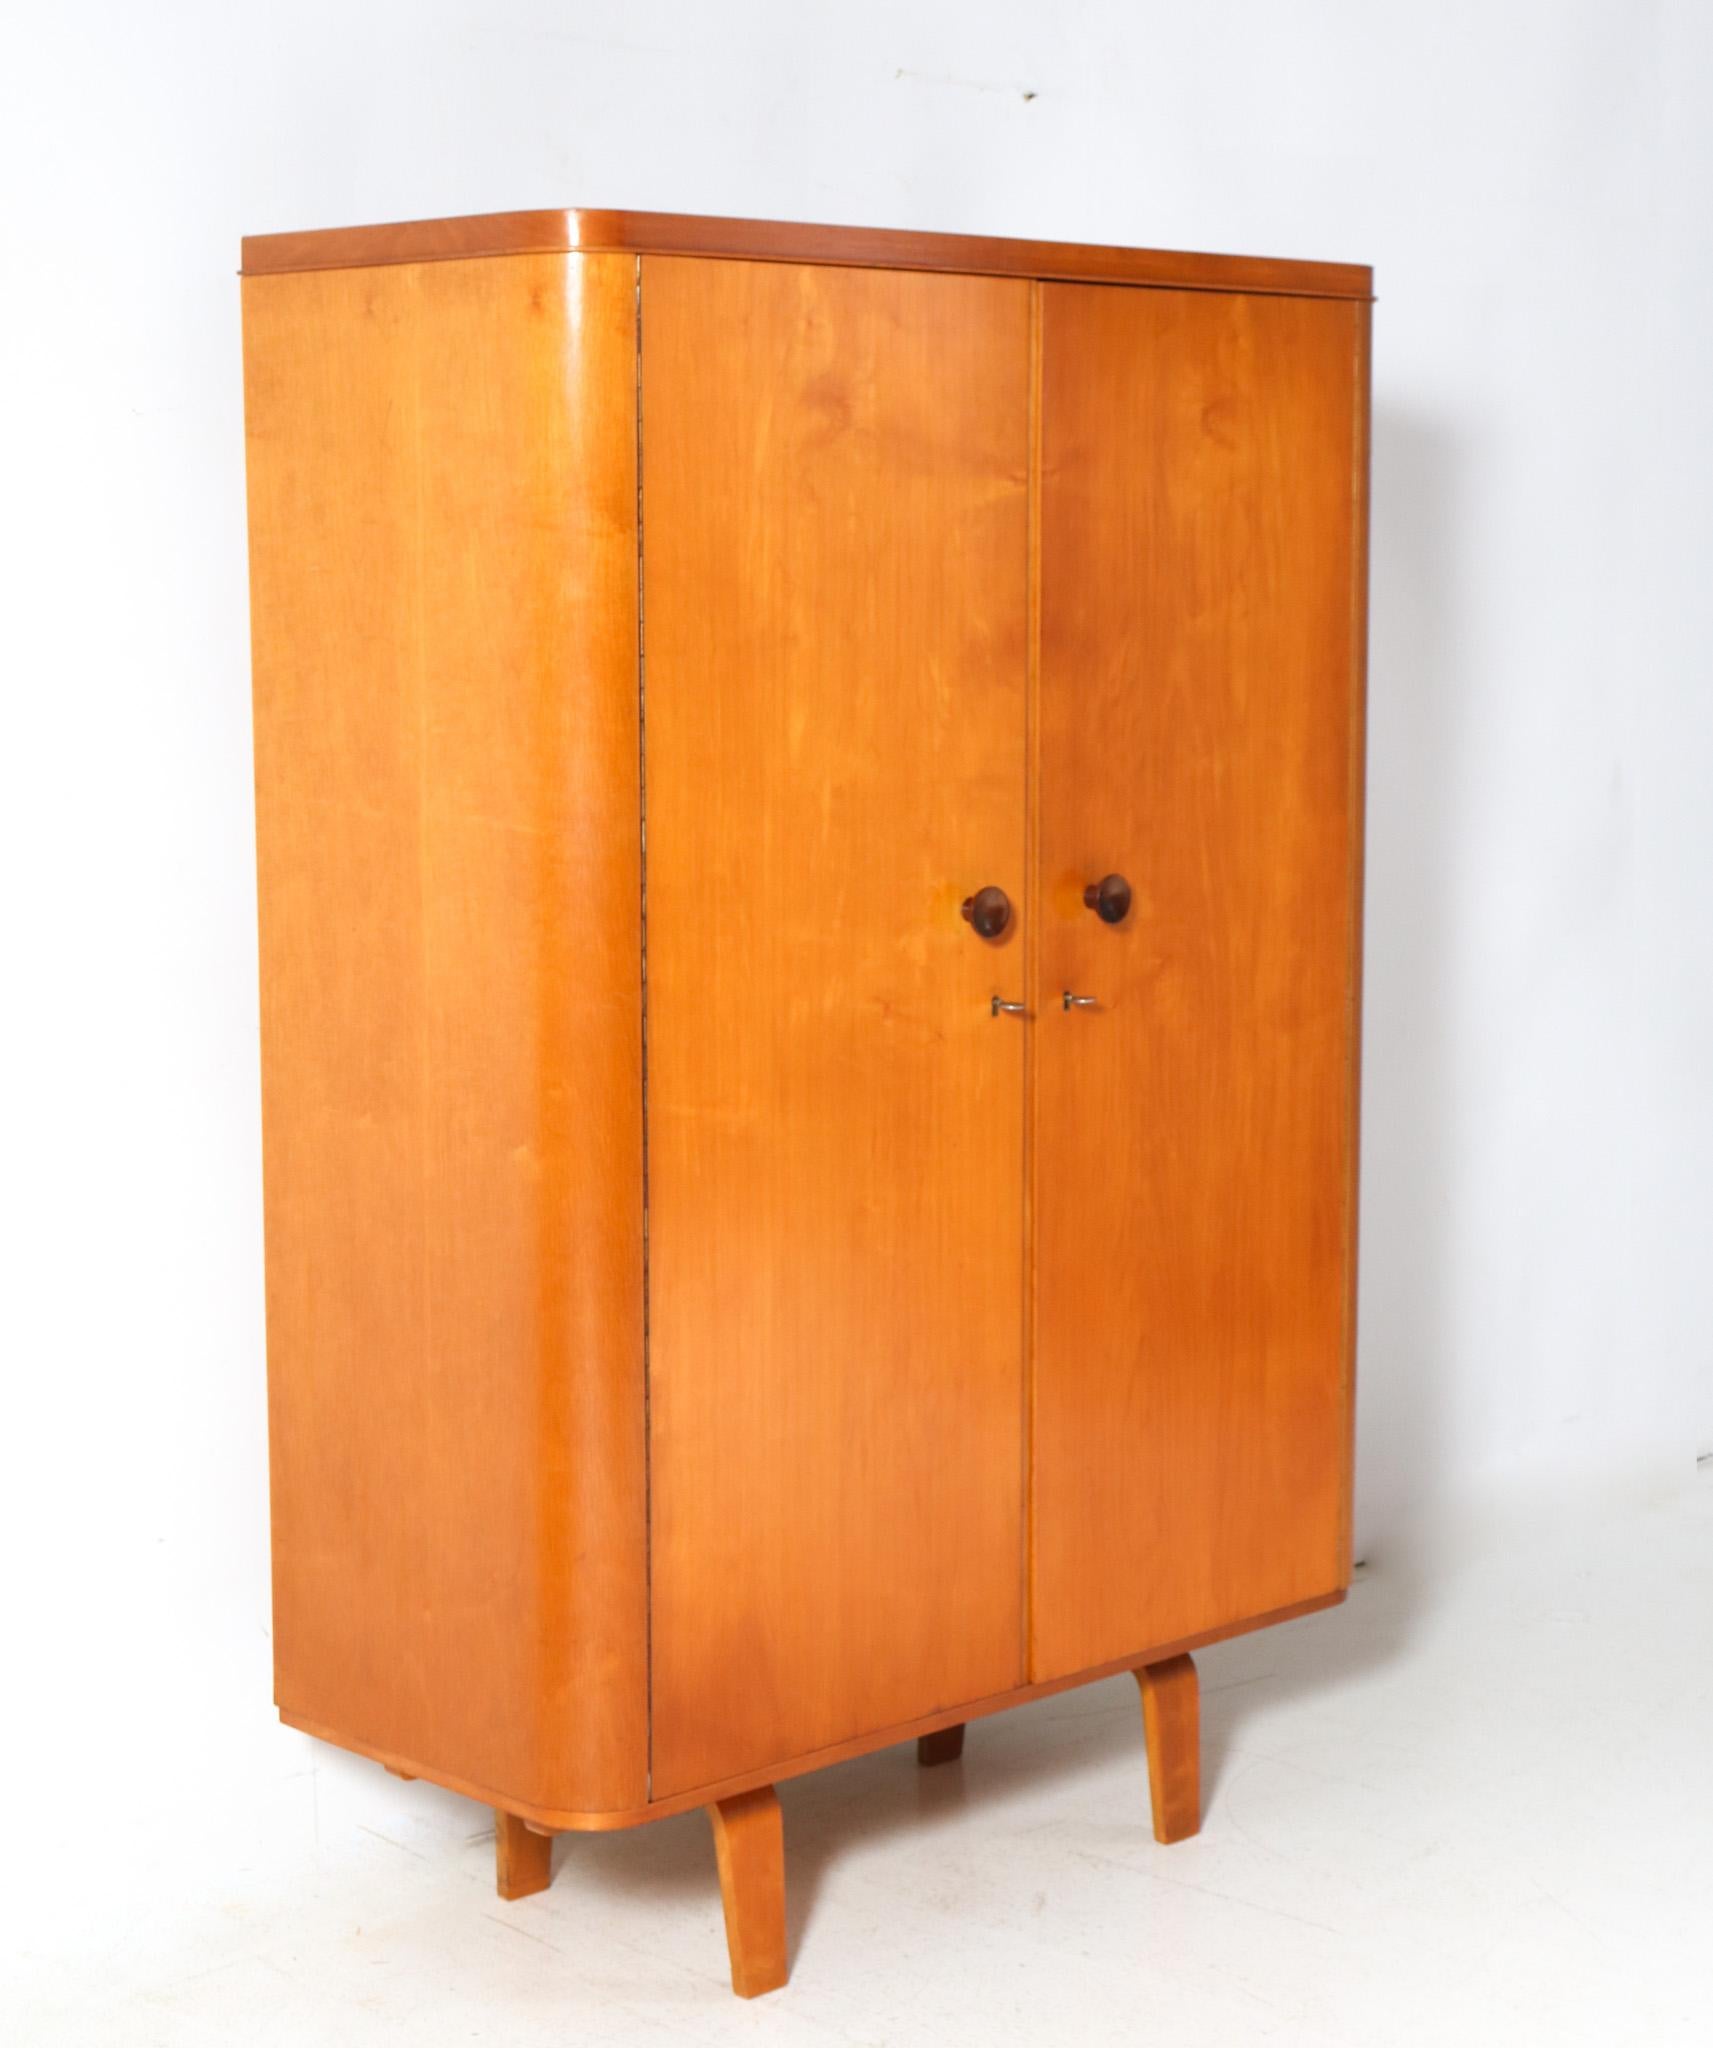 Magnificent and ultra rare Mid-Century Modern armoire or wardrobe.
Design by Cor Alons for Den Boer Gouda.
Striking Dutch design from 1949.
Original birch plywood base with the curved legs typical for the Mid-Century Modern designs by Cor Alons in